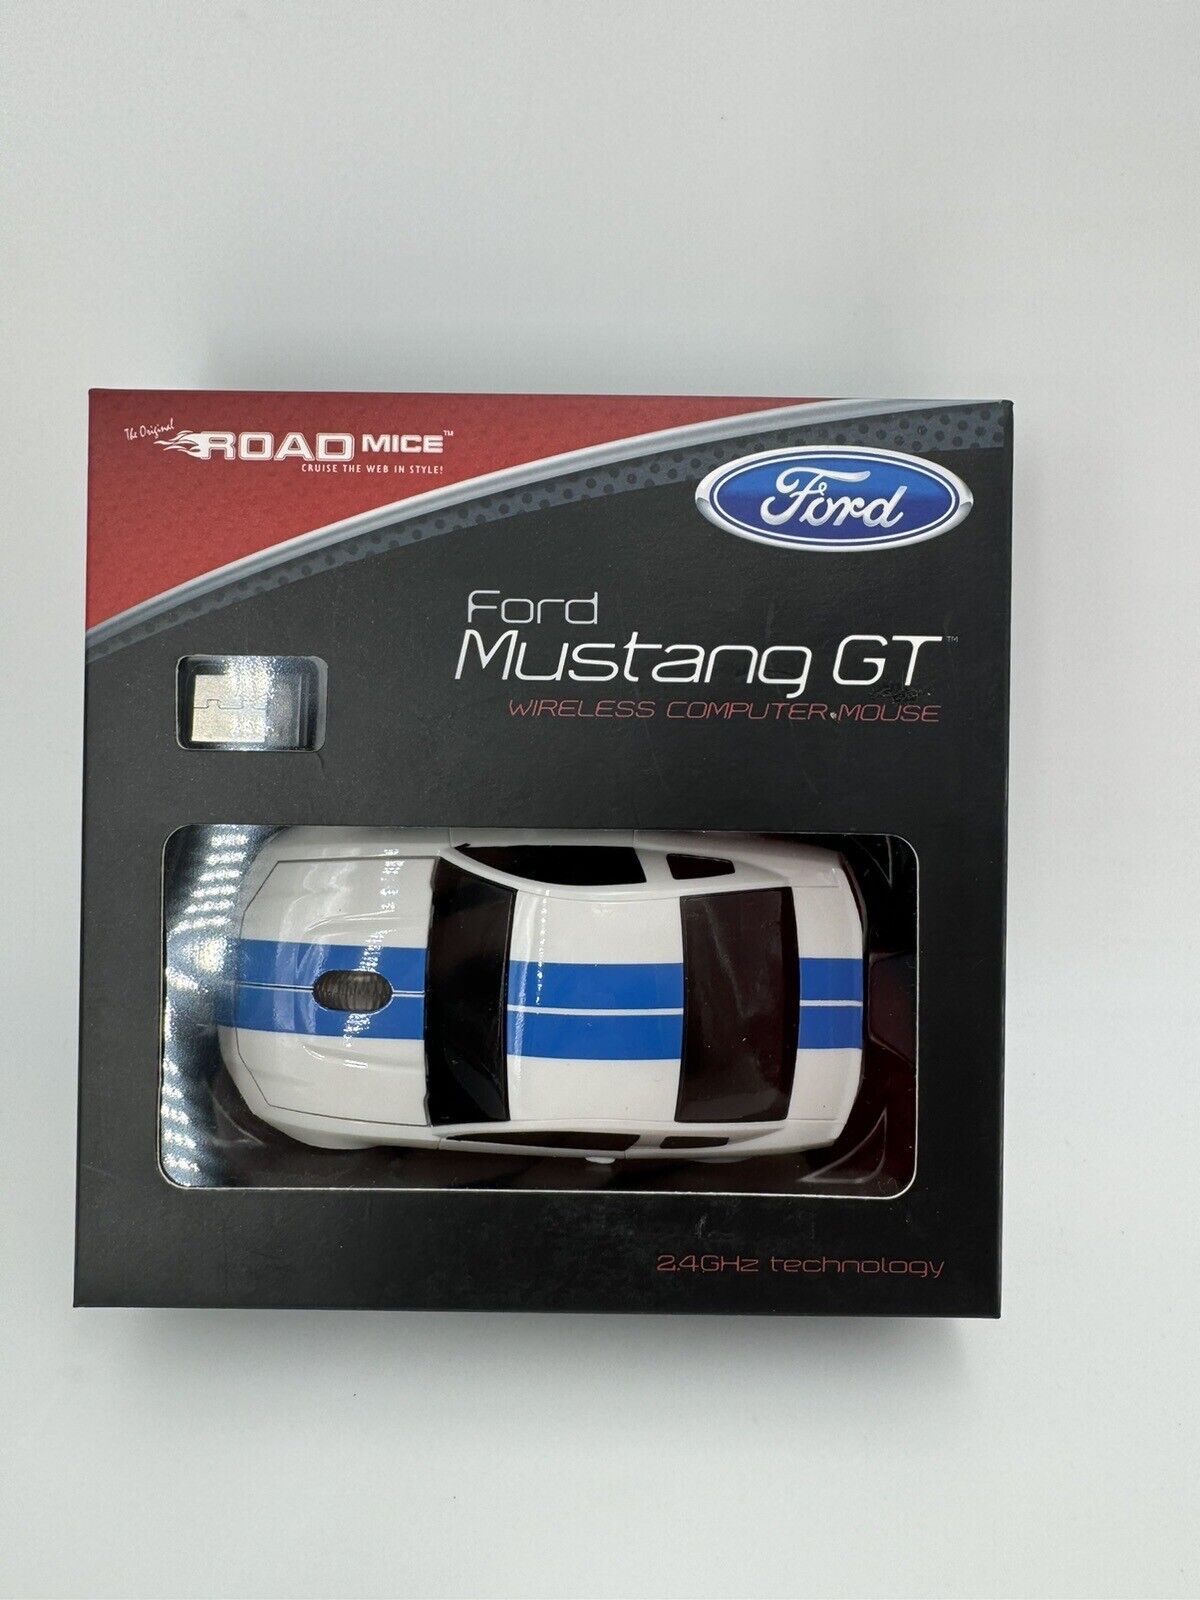 Original Road Mice Ford Mustang GT Gift Wireless Computer Mouse with headlights